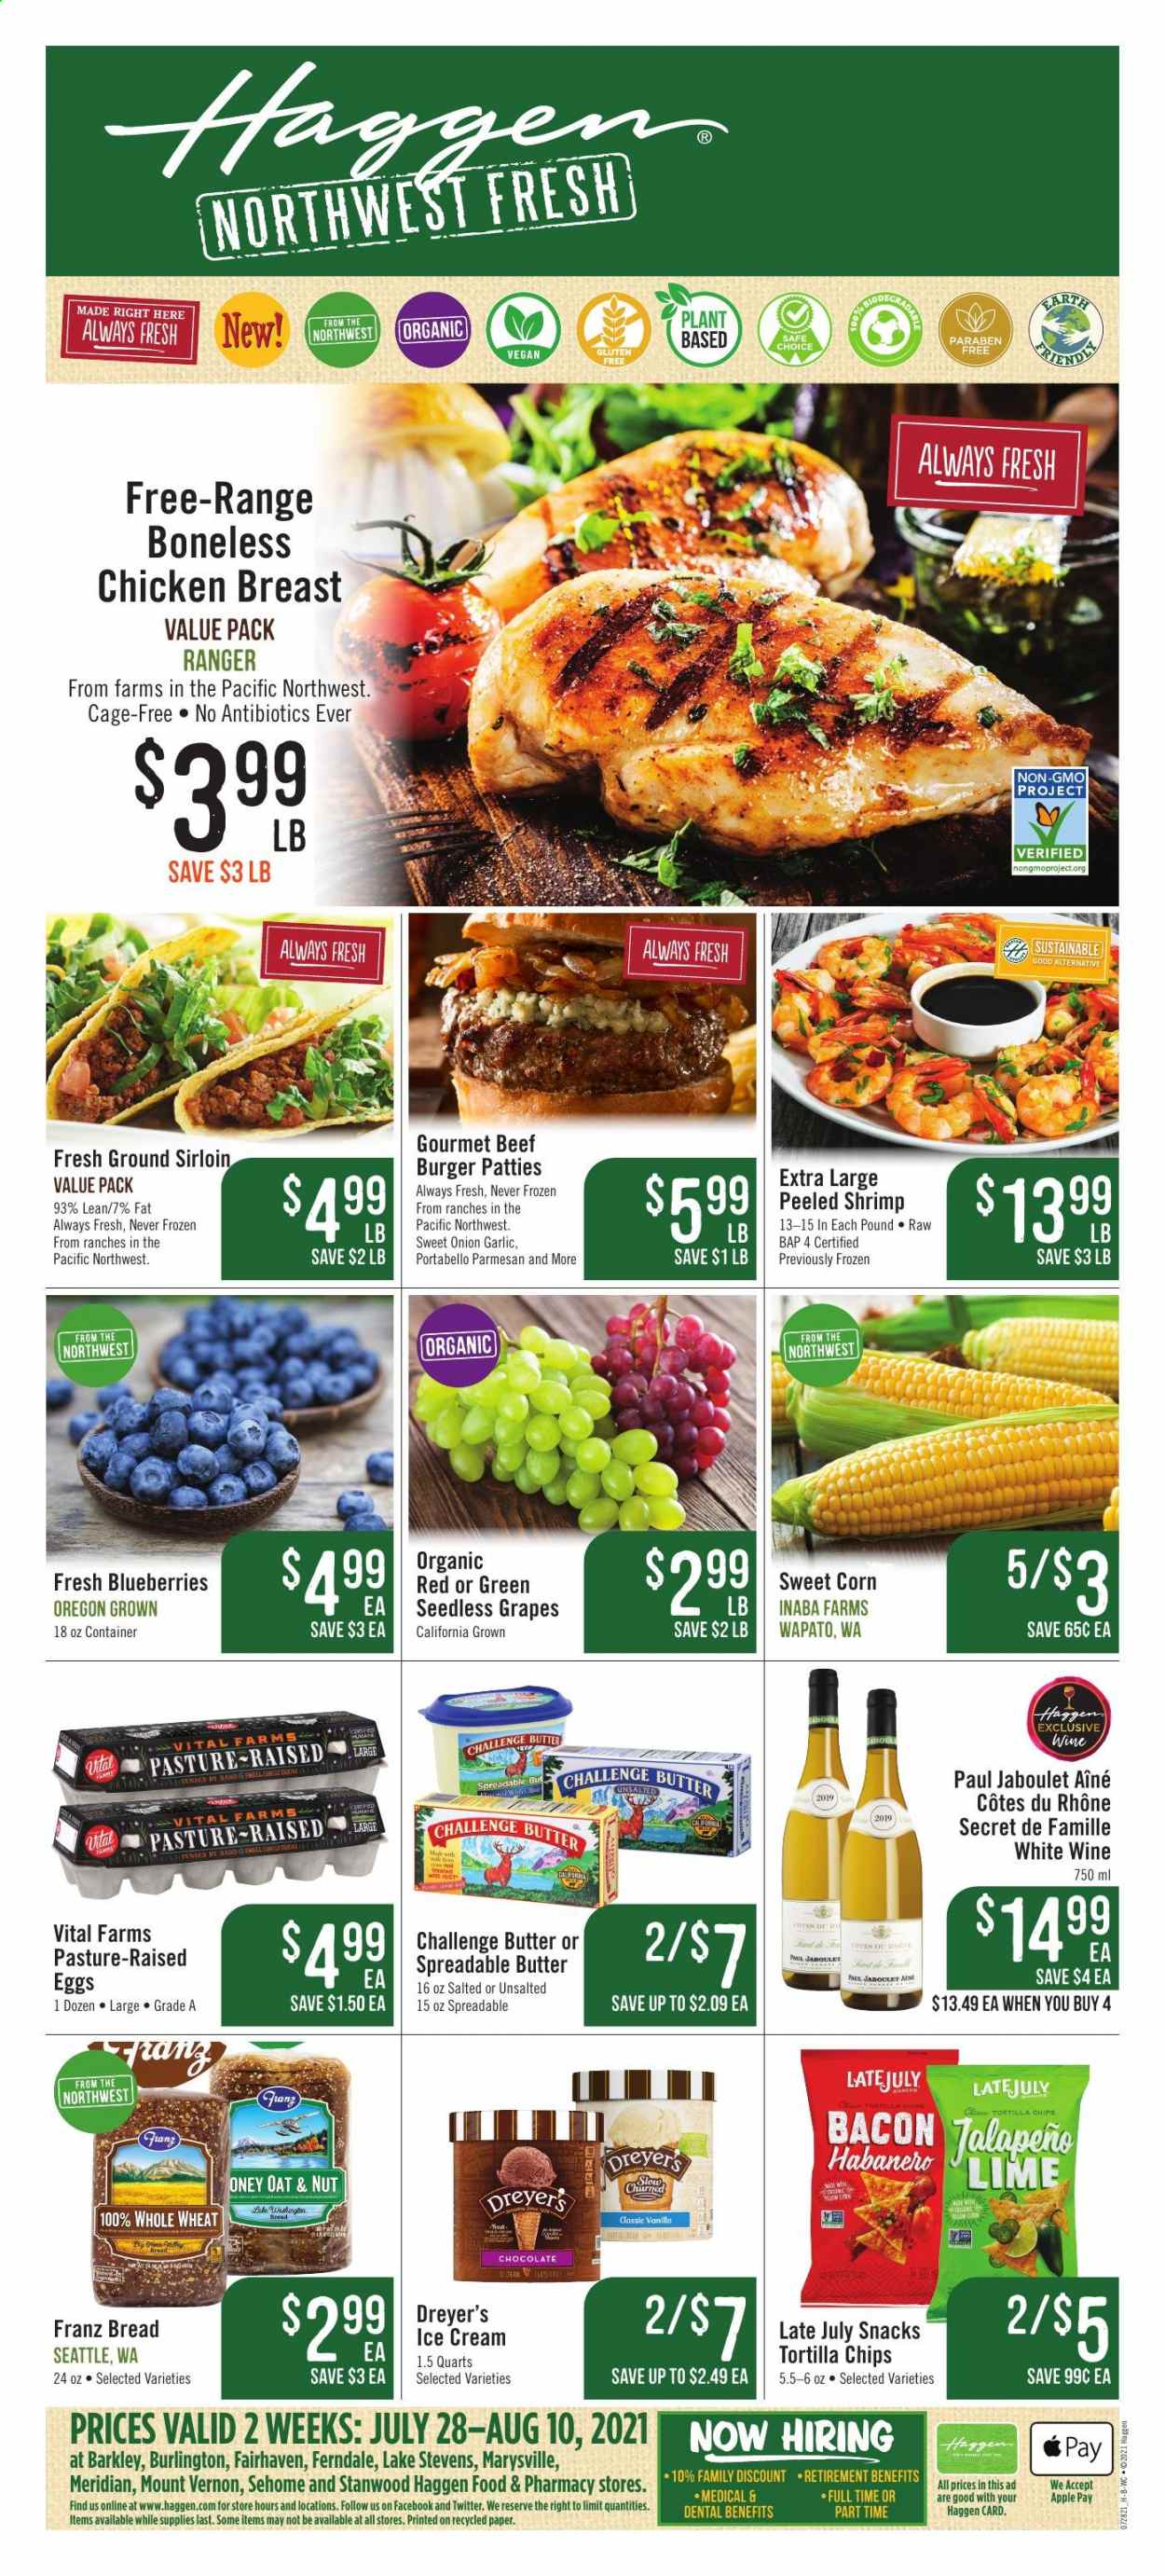 thumbnail - Haggen Flyer - 07/28/2021 - 08/10/2021 - Sales products - seedless grapes, wheat bread, corn, garlic, onion, sweet corn, blueberries, grapes, hamburger, beef burger, bacon, parmesan, eggs, cage free eggs, butter, spreadable butter, ice cream, snack, tortilla chips, oats, white wine, wine, chicken breasts, burger patties. Page 1.